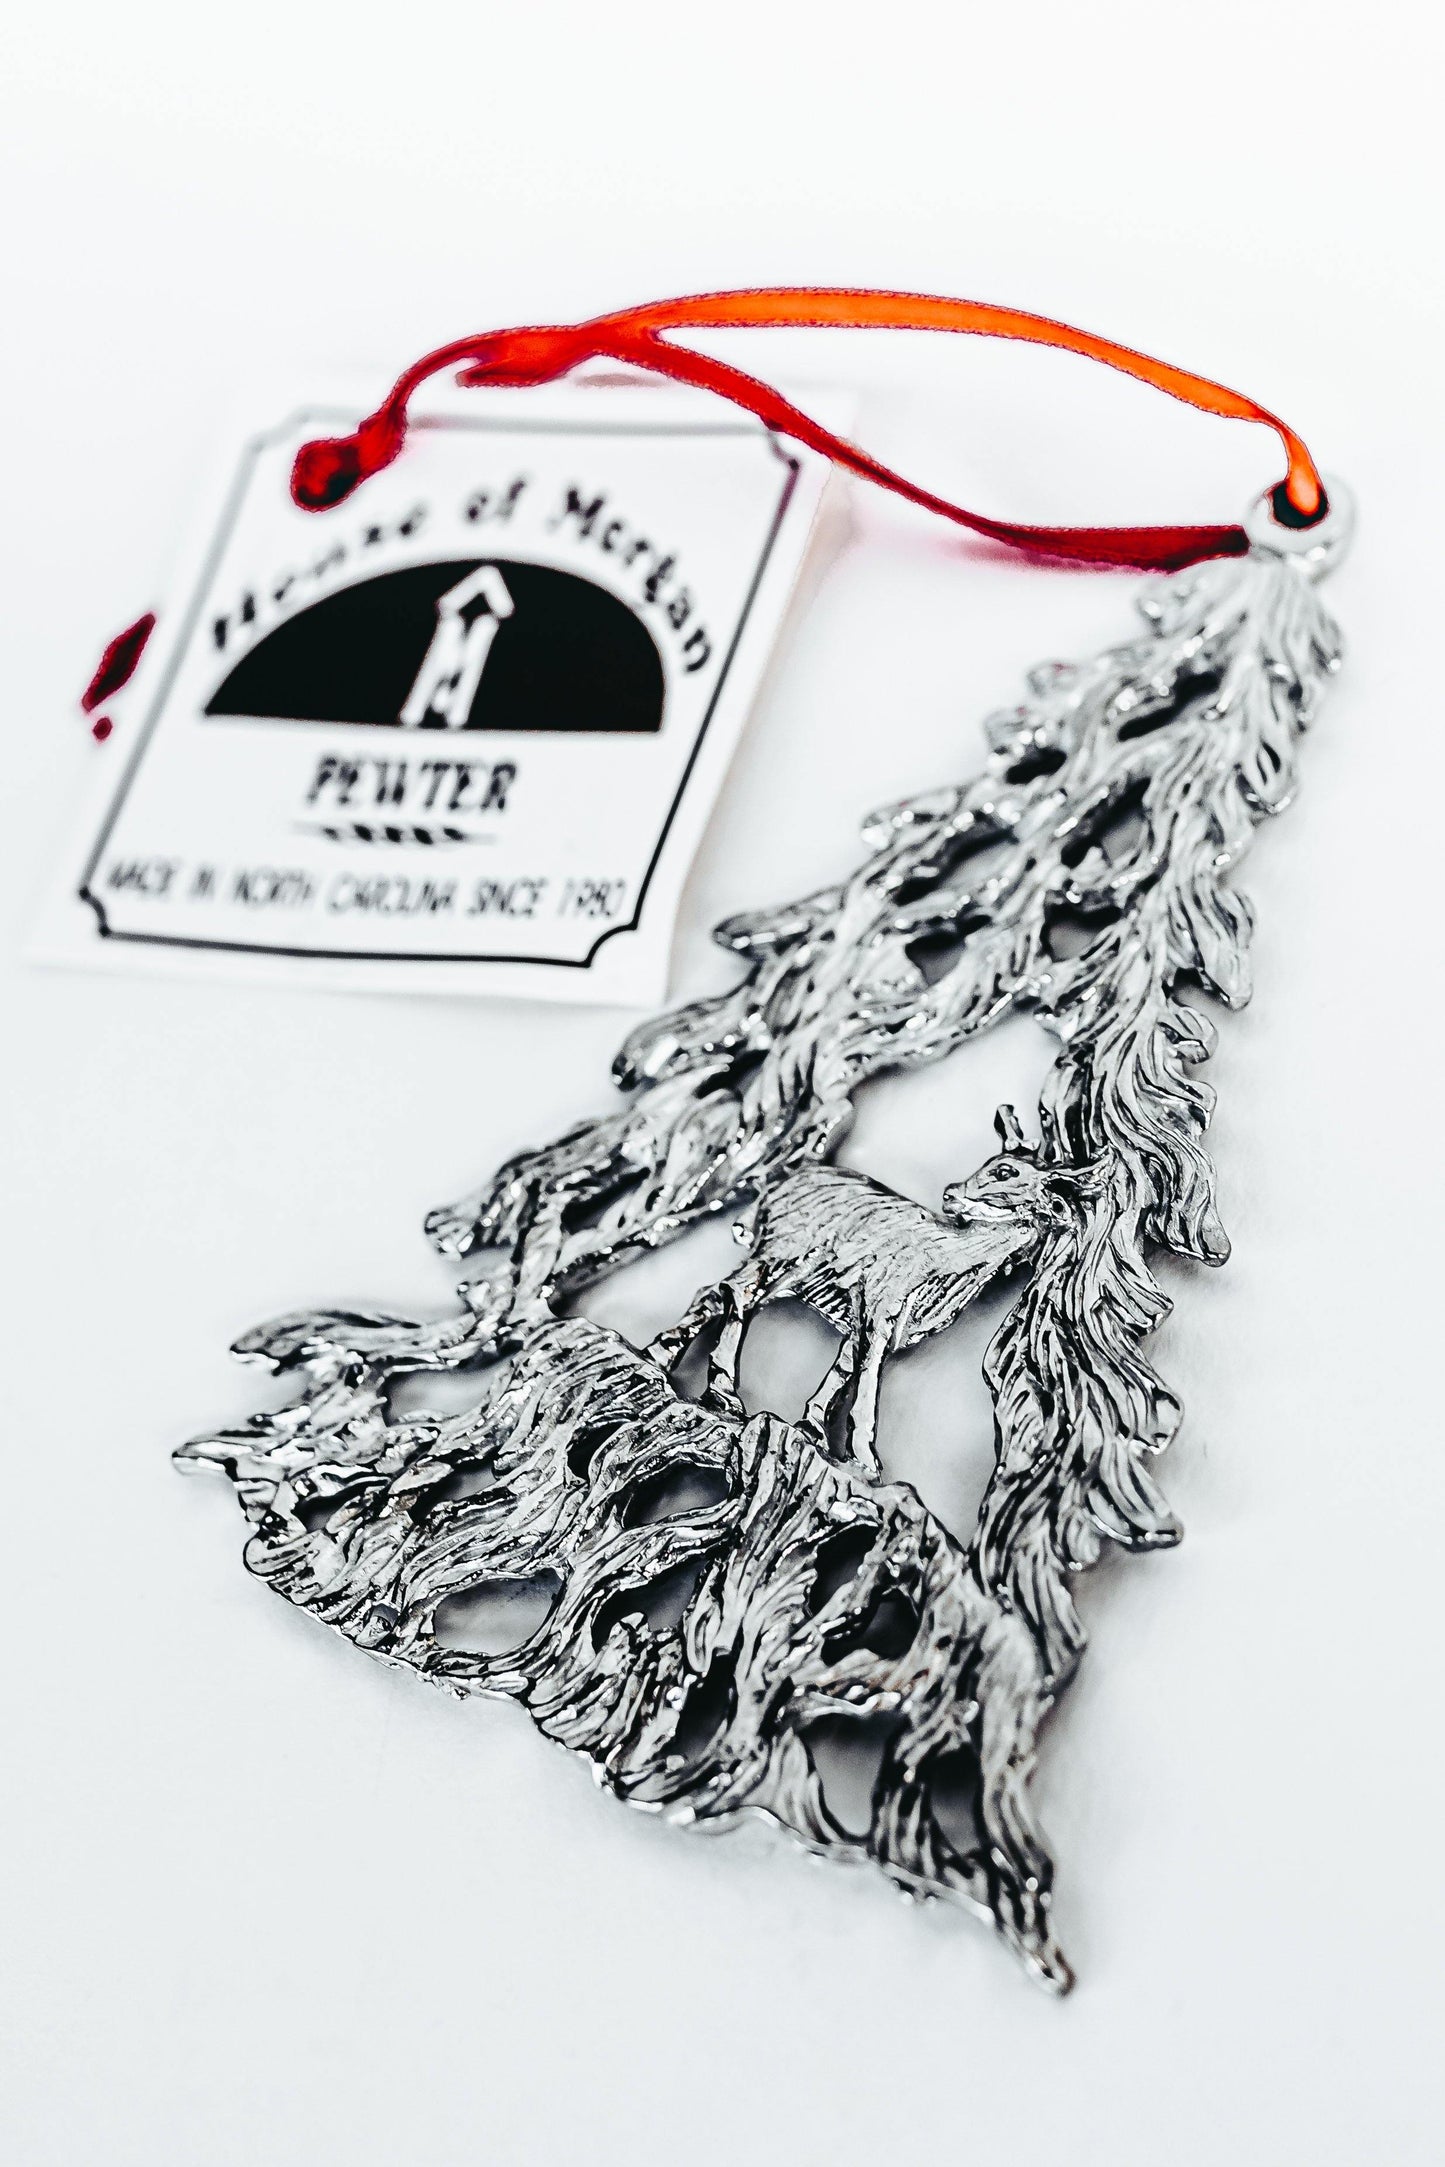 Handmade Winter Wonderland Collection Gift Set of Two Christmas Ornaments - House of Morgan Pewter